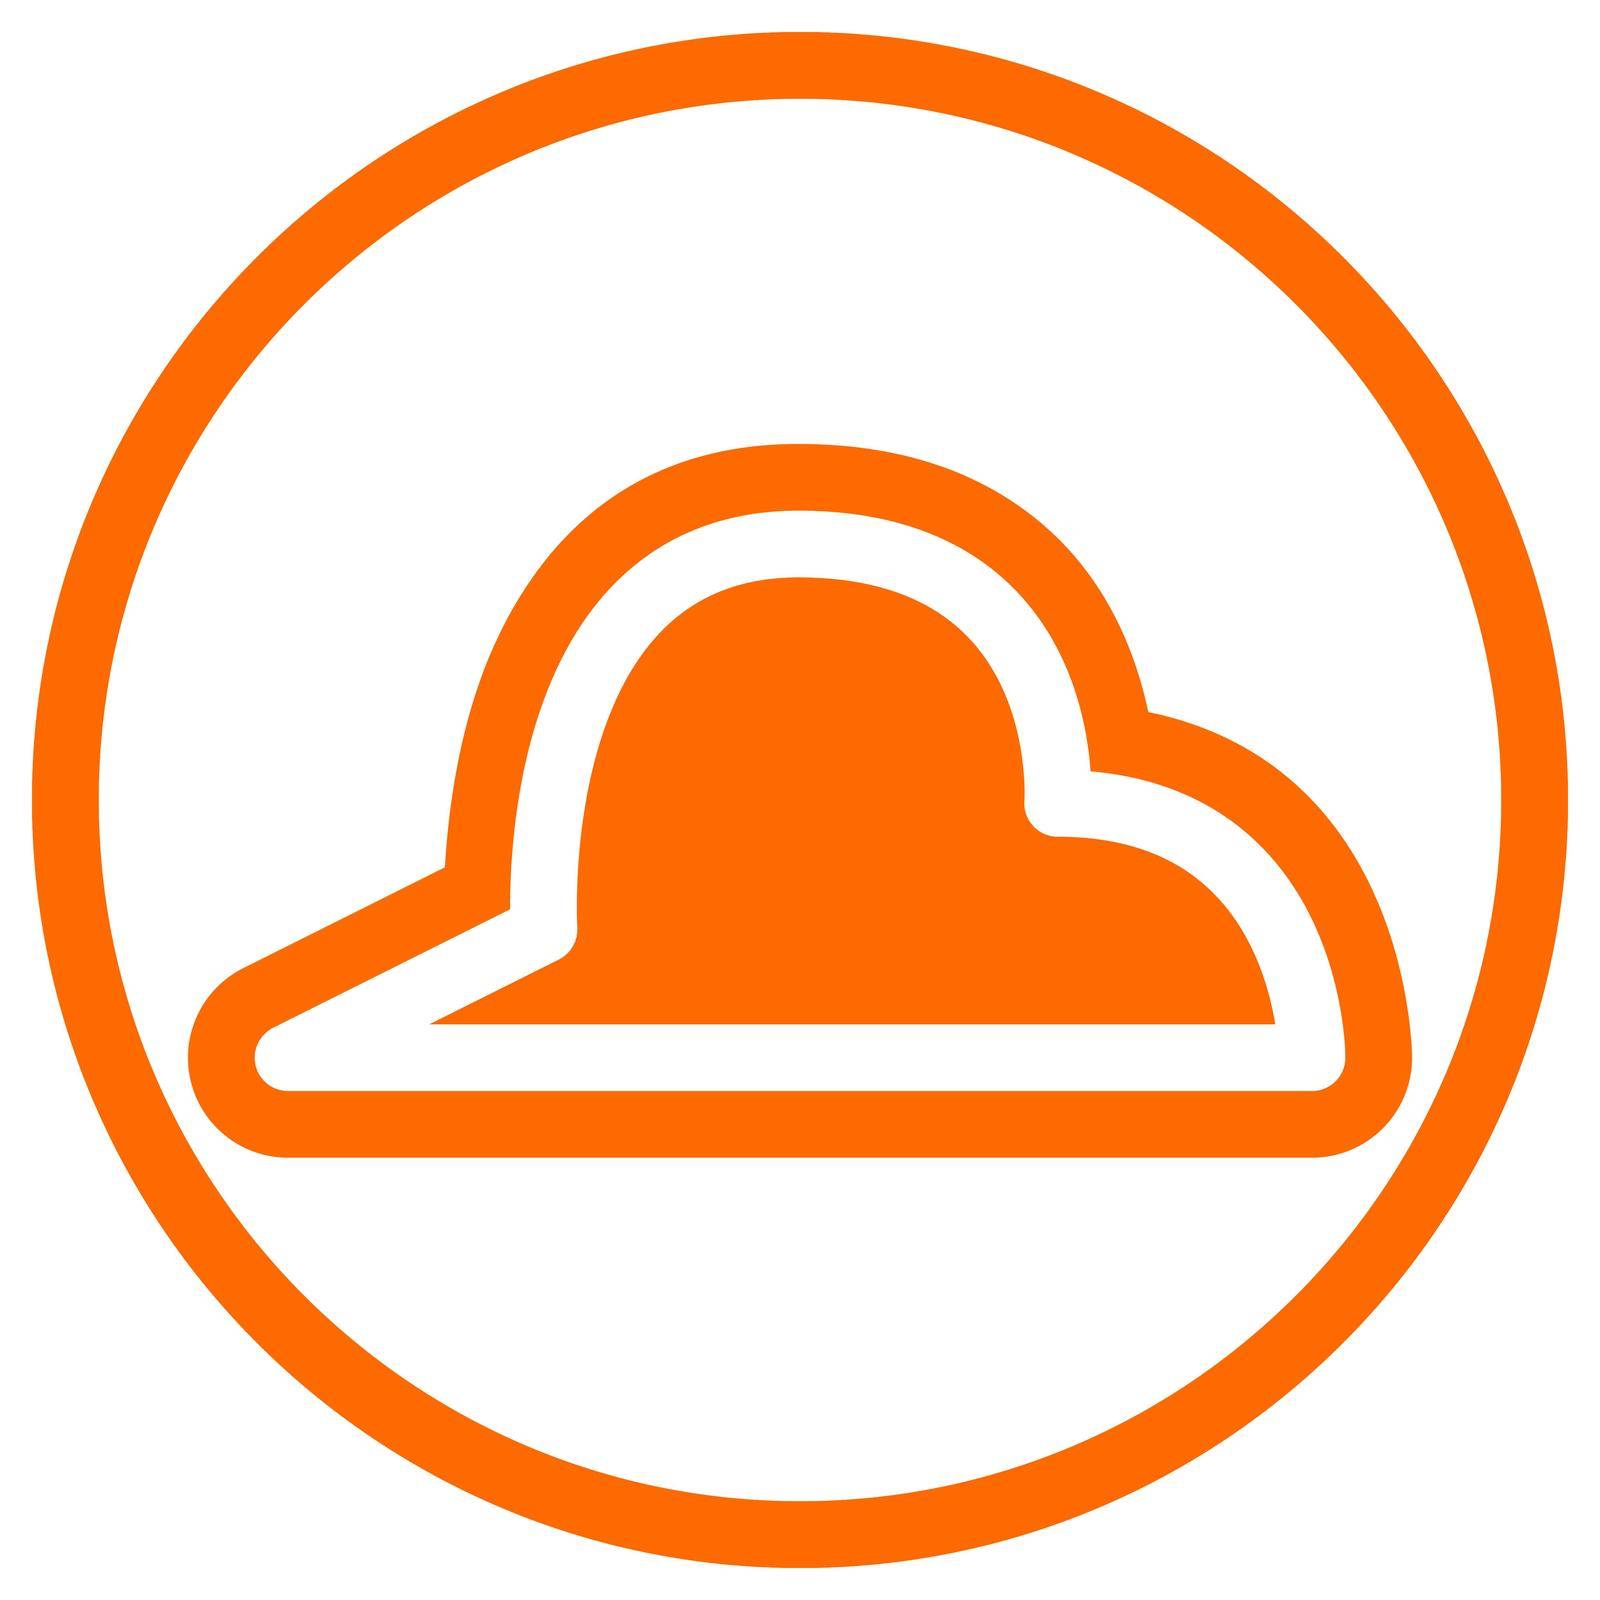 Sharp cloud icon in flat design with orange color and outline on a line circle background.